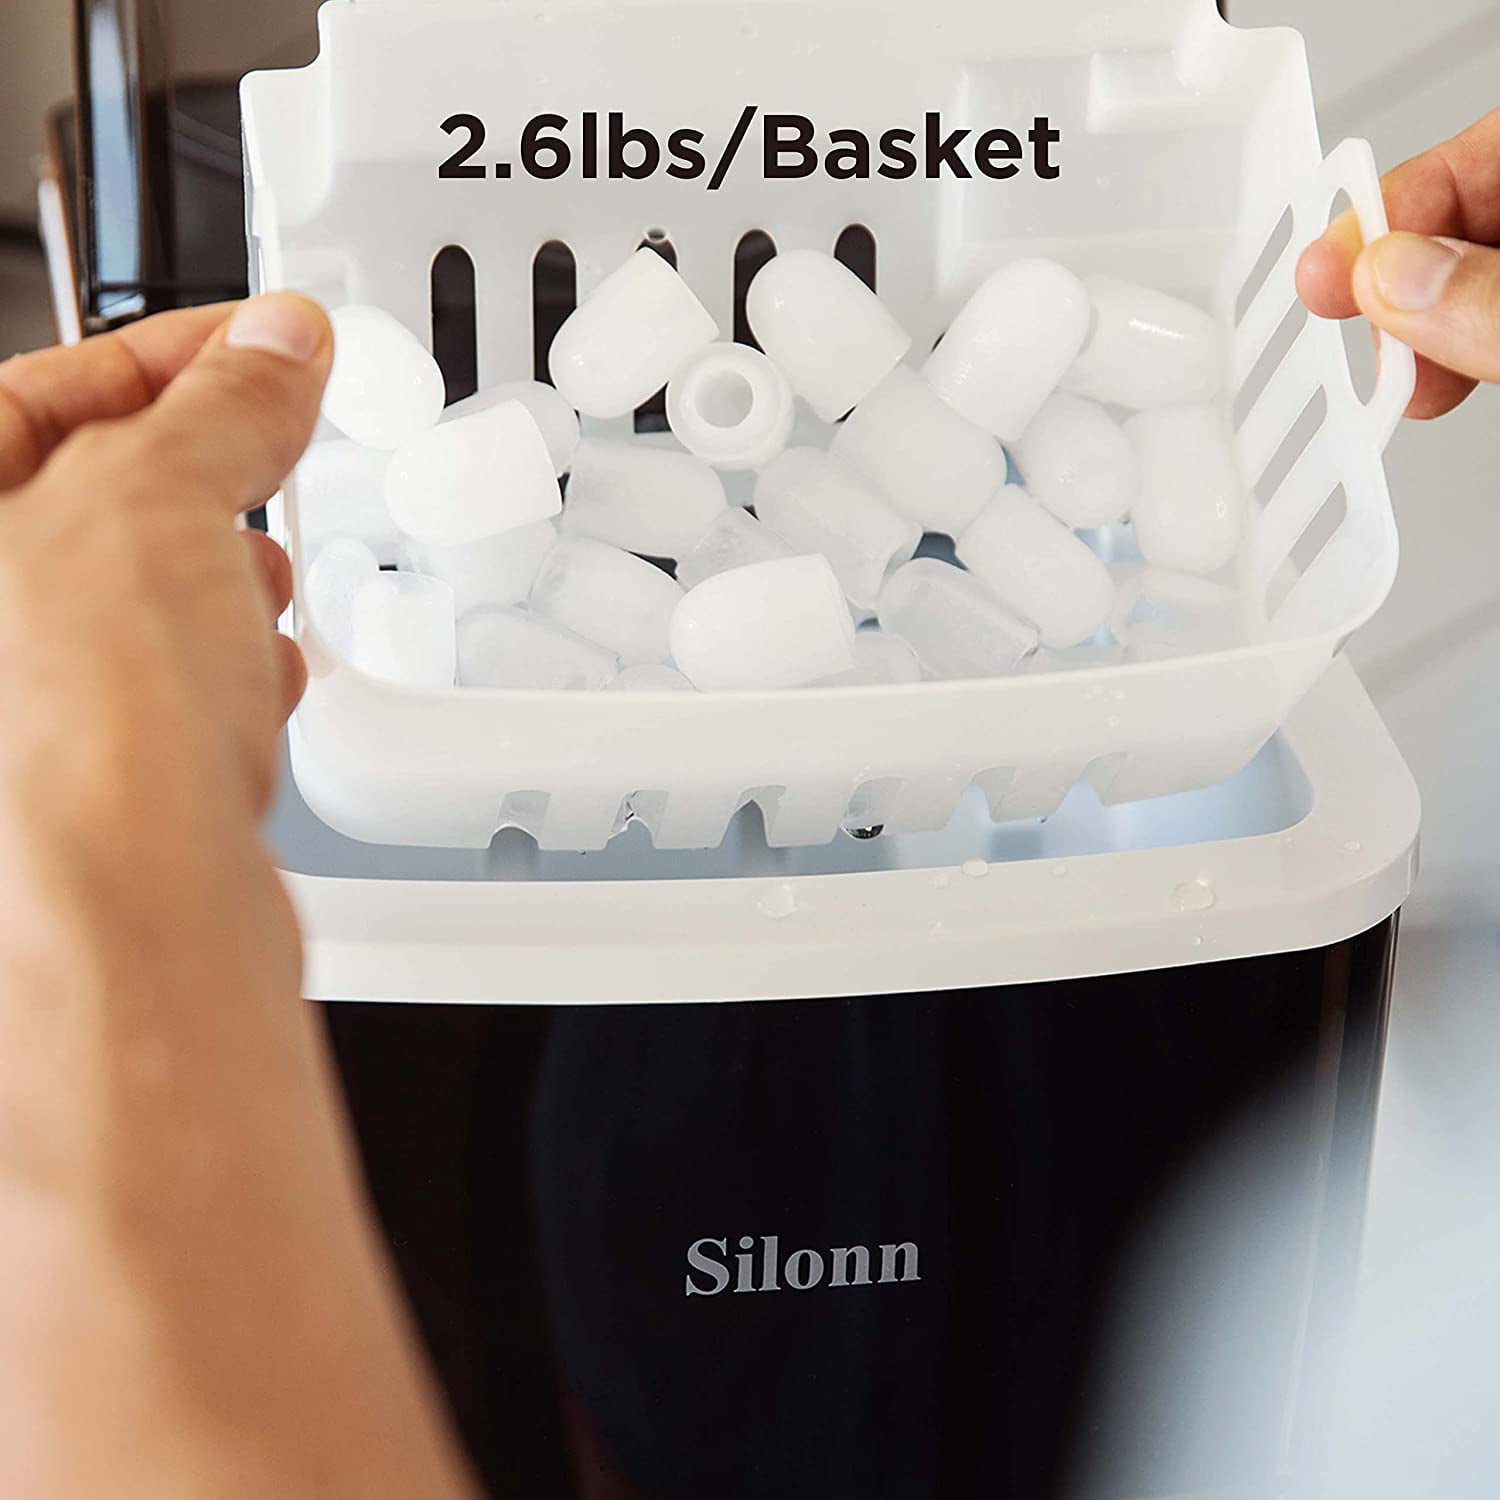 Silonn Ice Makers Countertop 9 Bullet Ice Cubes Ready in 6 Minutes